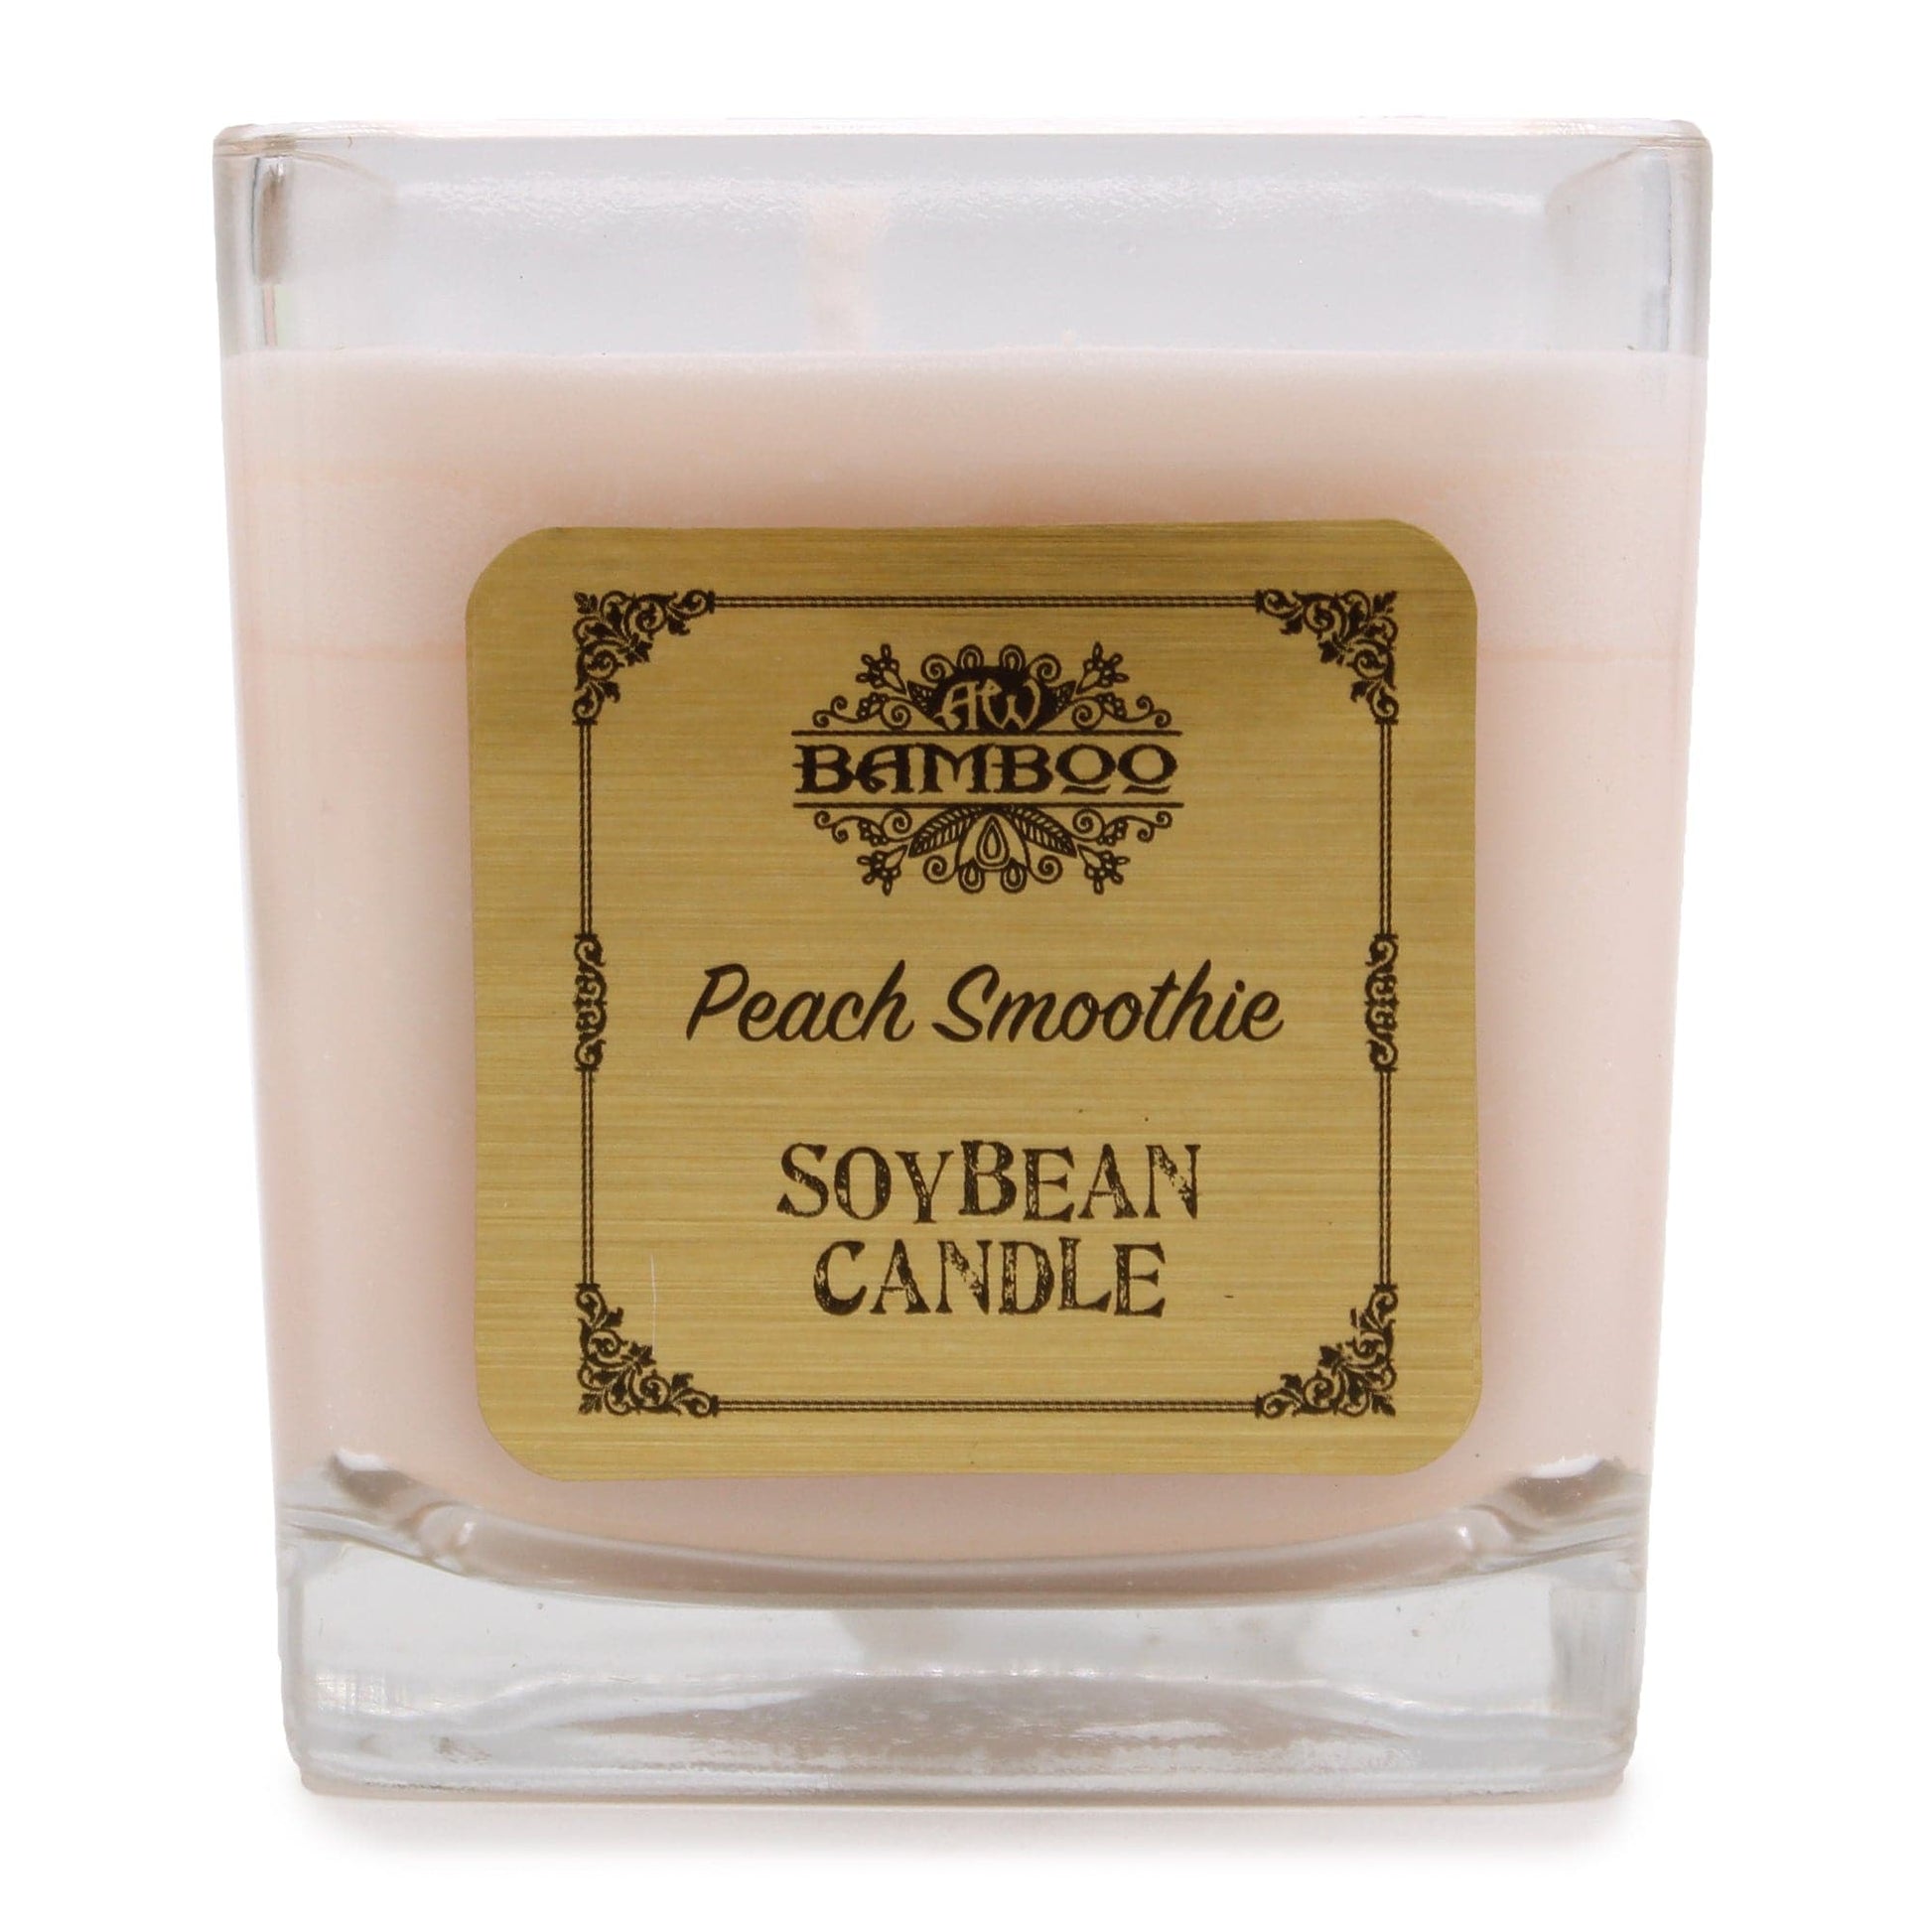 Soybean Jar Candle - Peach Smoothie - best price from Maltashopper.com SOYC-12